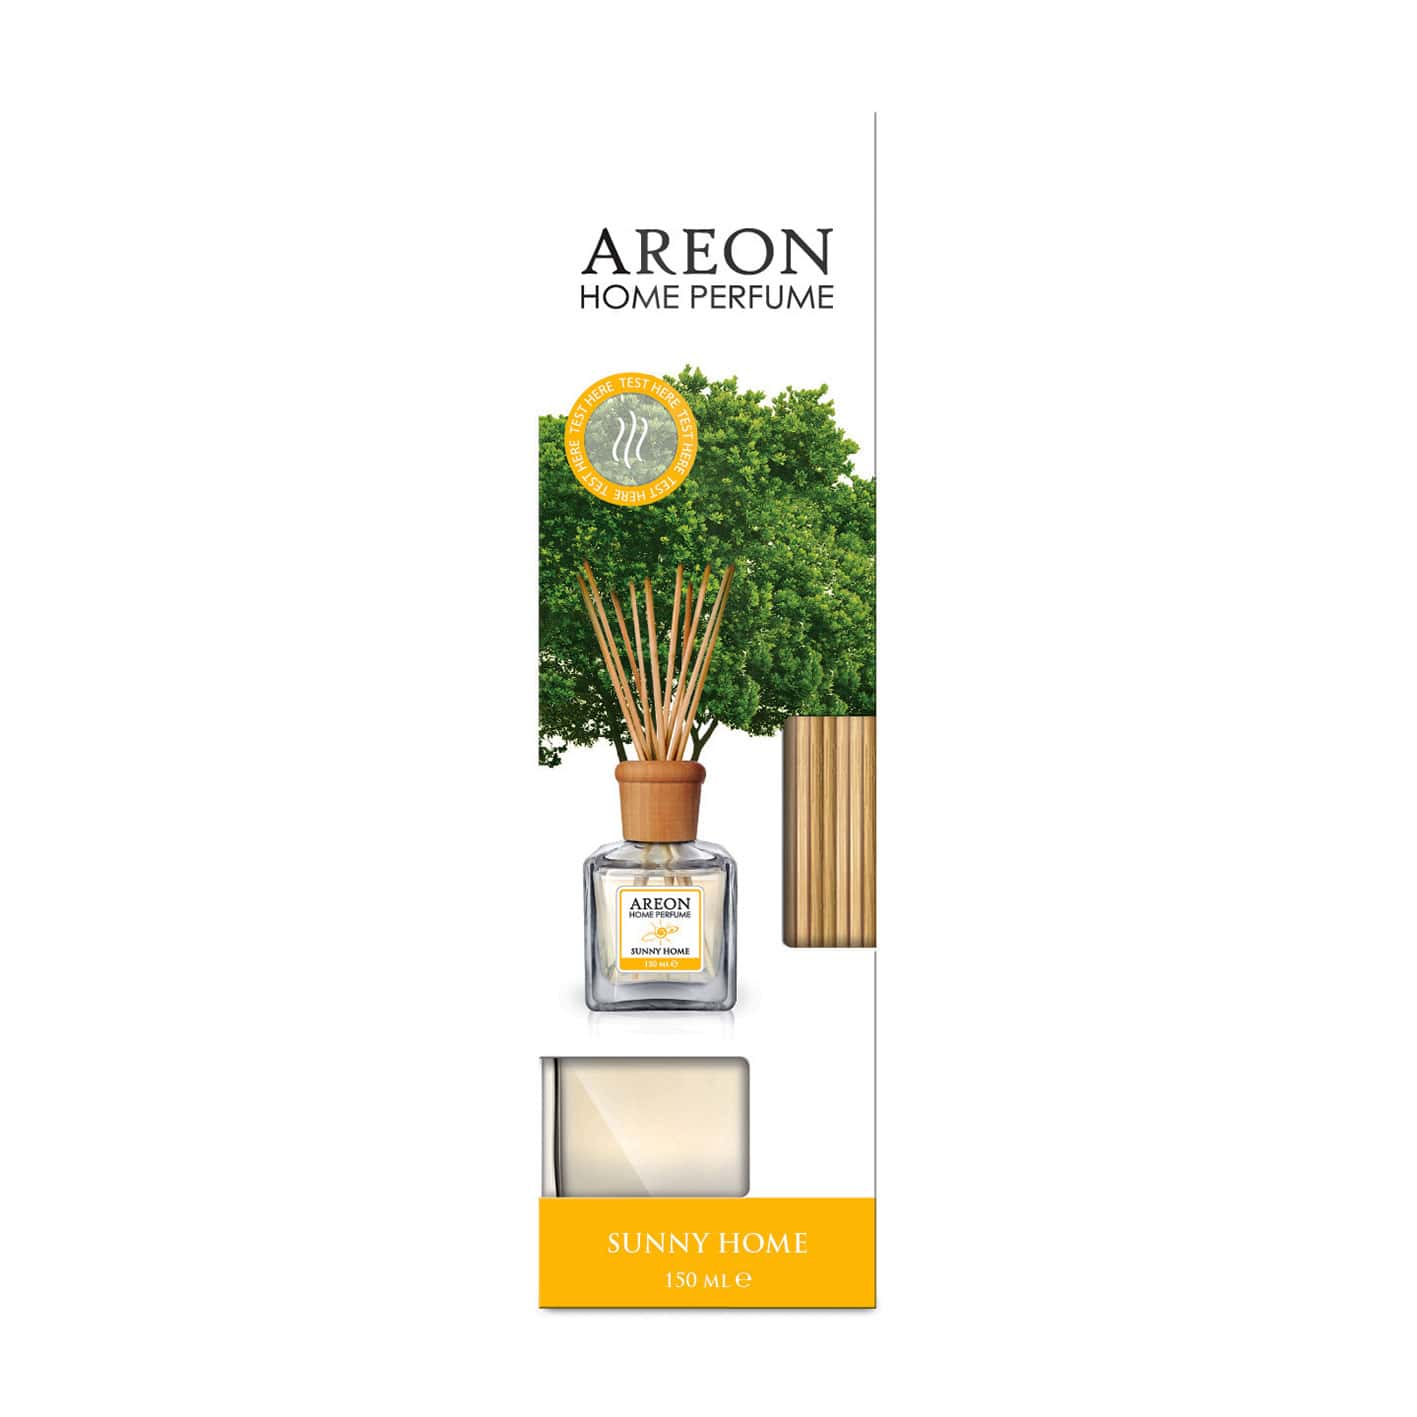 Areon Perfume Sticks 150 ml For Home - Sunny Home Scent